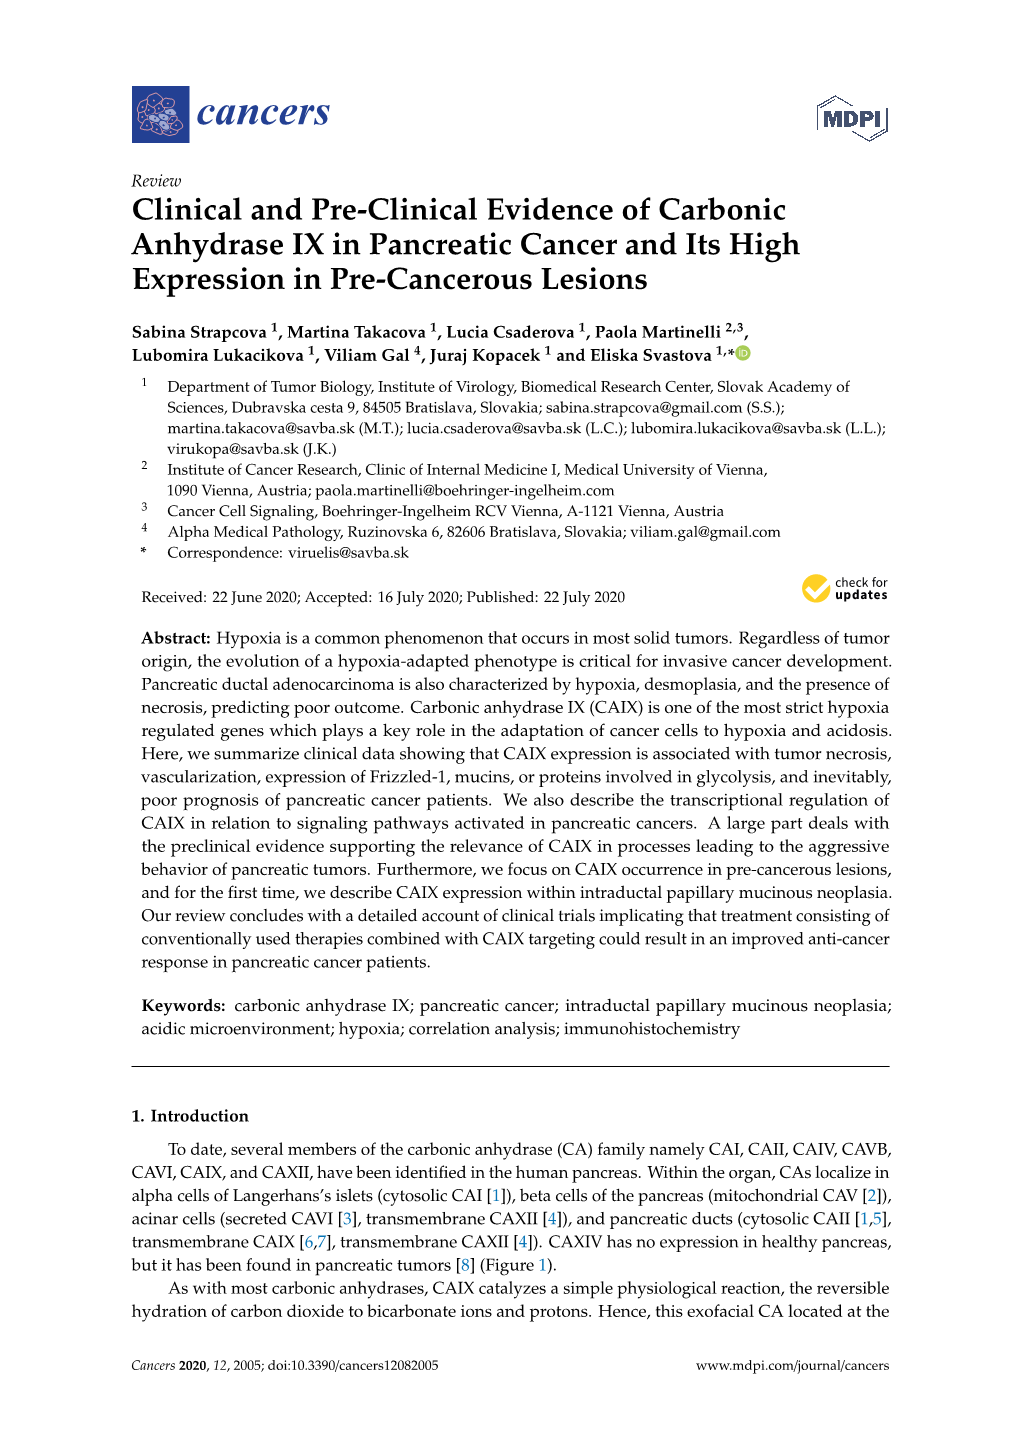 Clinical and Pre-Clinical Evidence of Carbonic Anhydrase IX in Pancreatic Cancer and Its High Expression in Pre-Cancerous Lesions